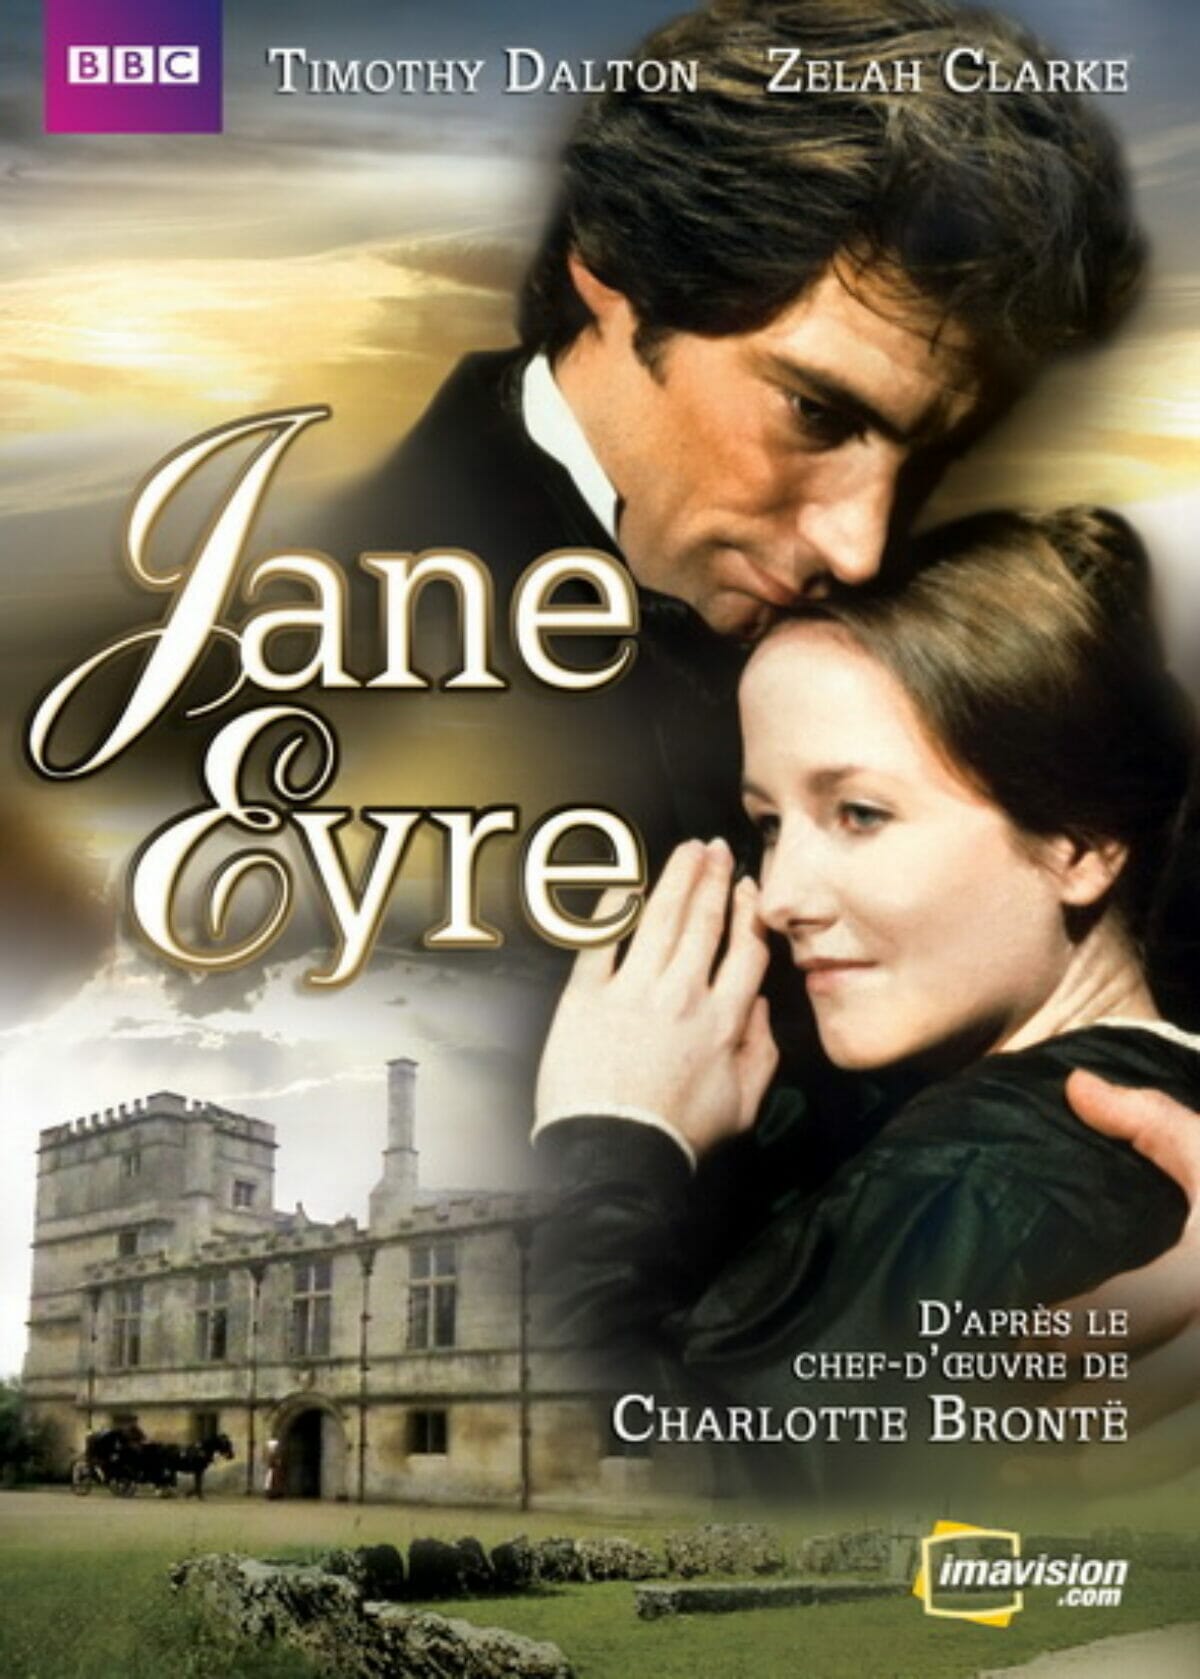 Jane-Eyre-poster-1983